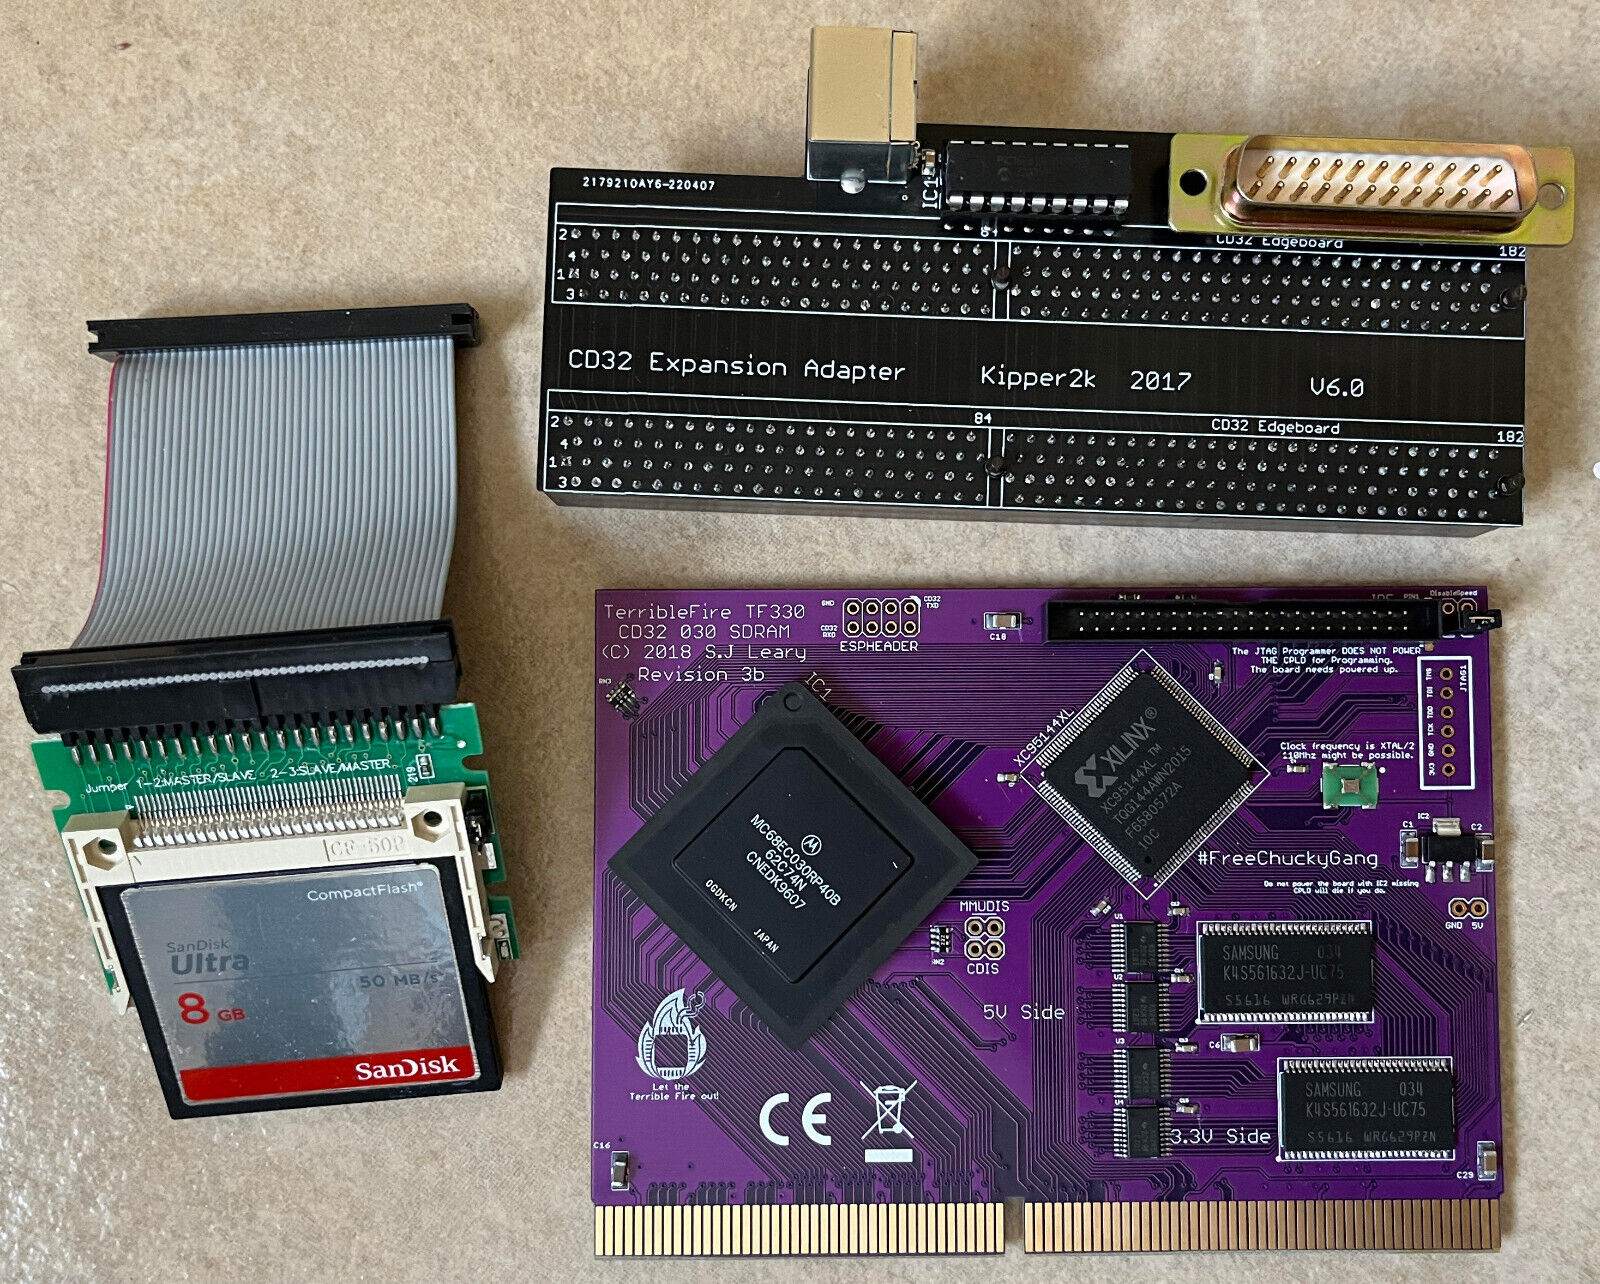 TF330: an Amiga CD32 expansion set with 68030, 128MB RAM, IDE interface, CF card